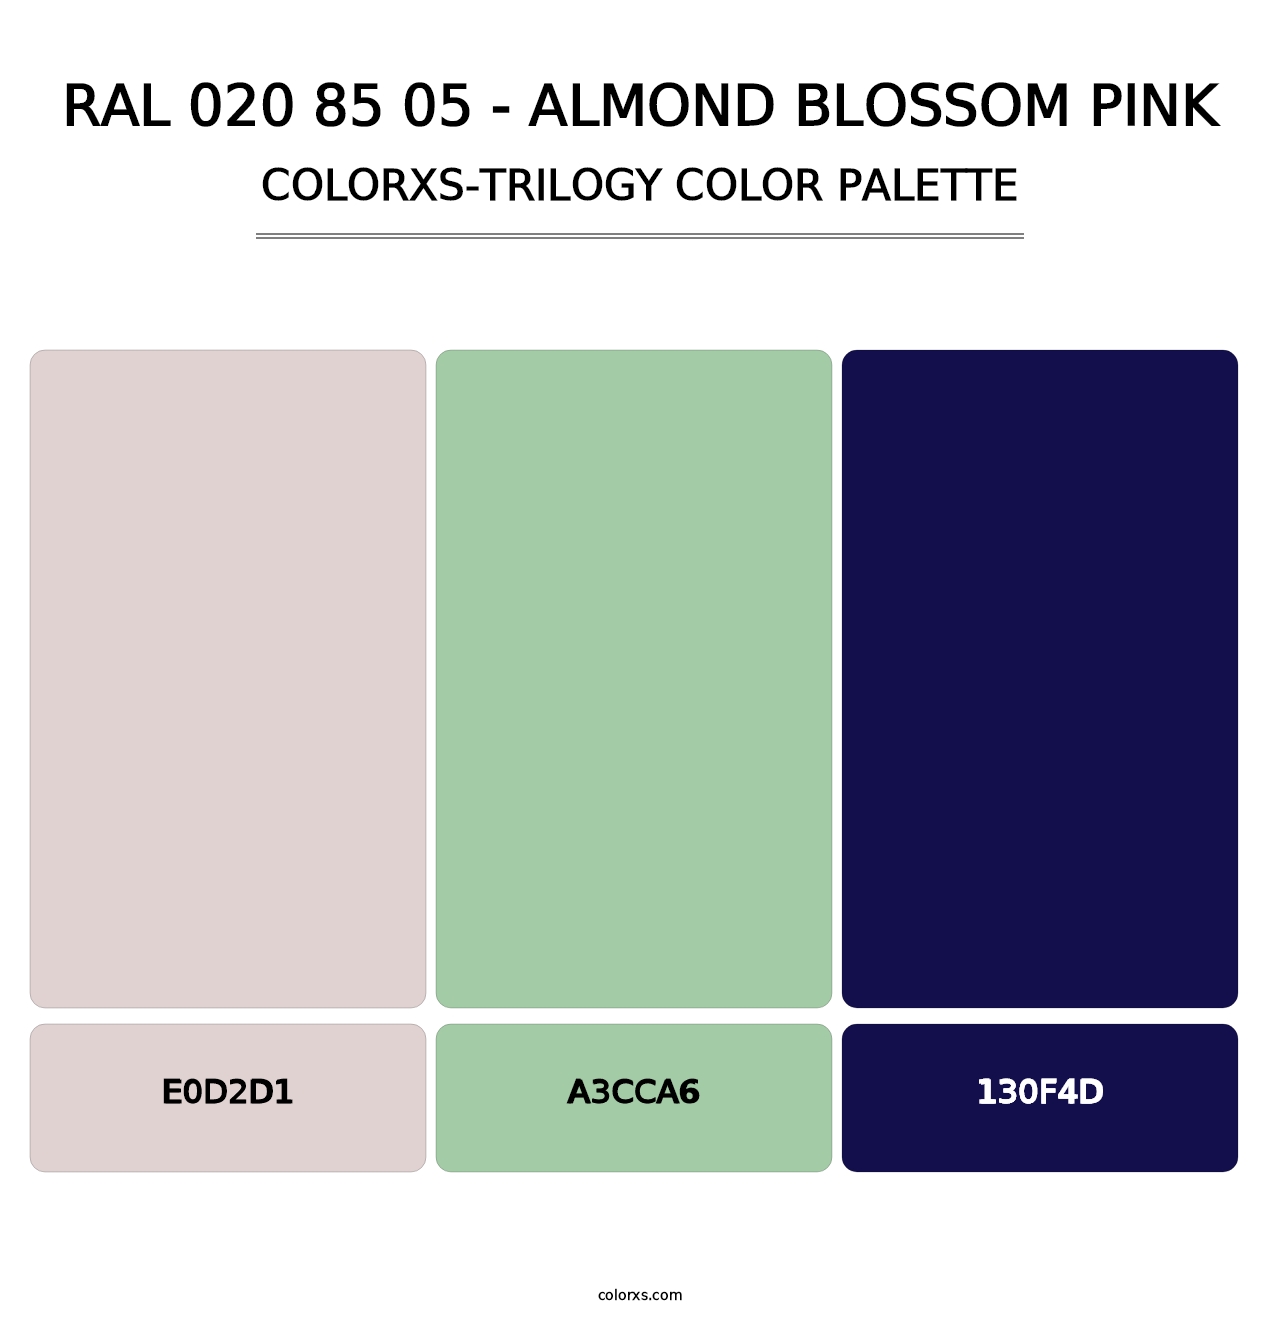 RAL 020 85 05 - Almond Blossom Pink - Colorxs Trilogy Palette